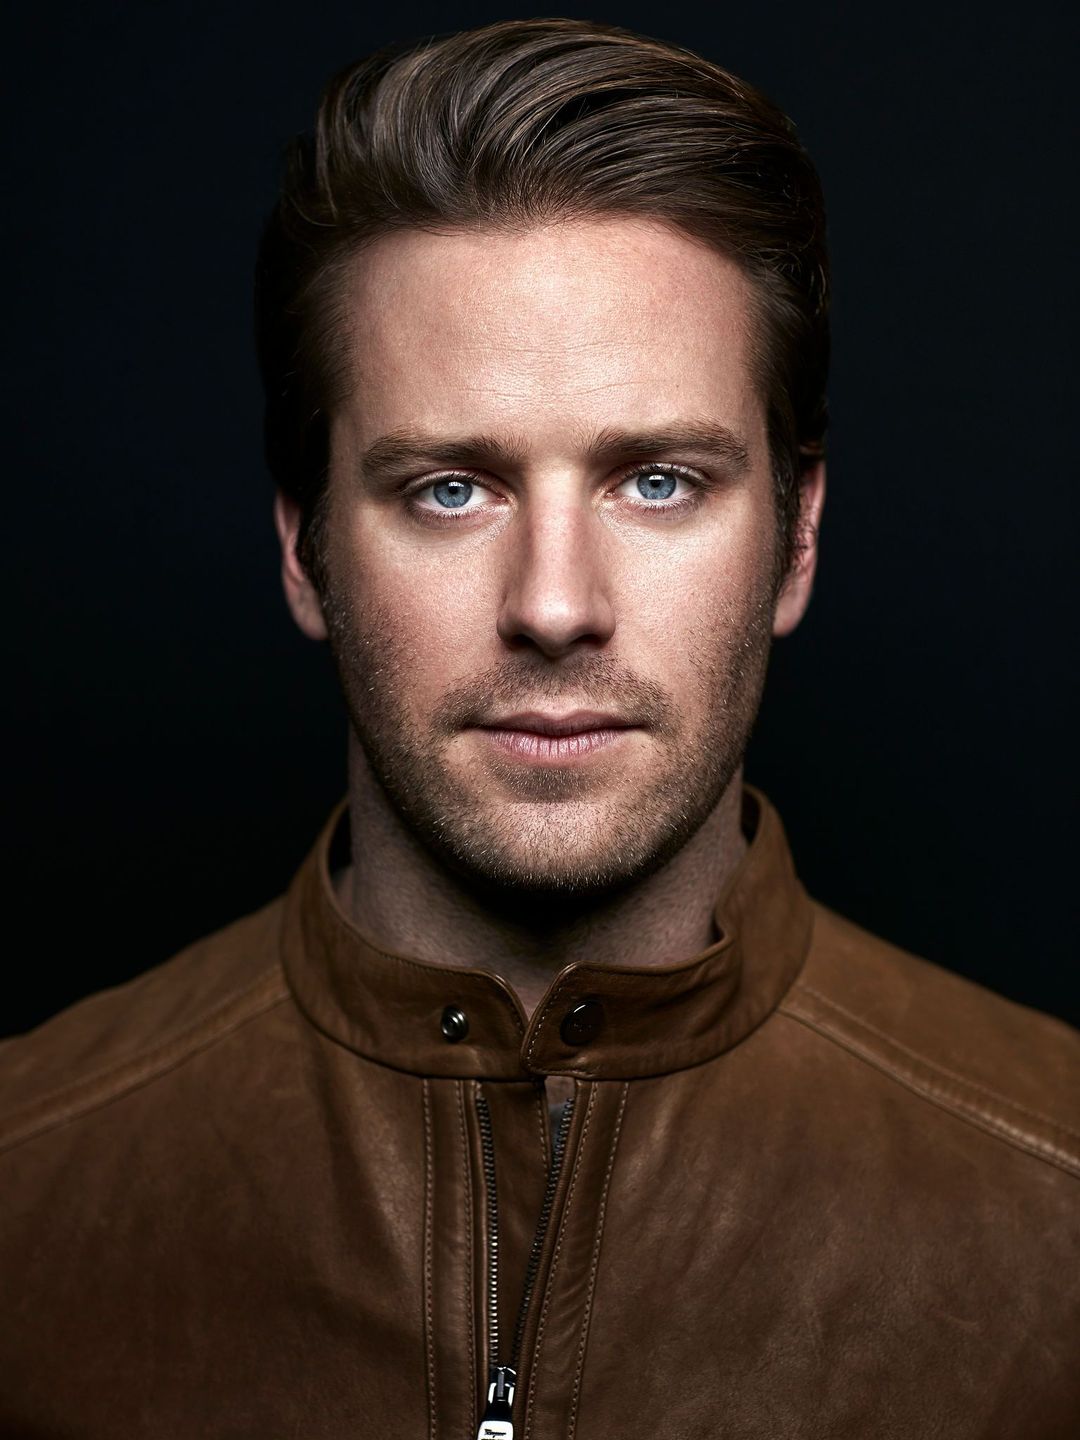 Armie Hammer dating history